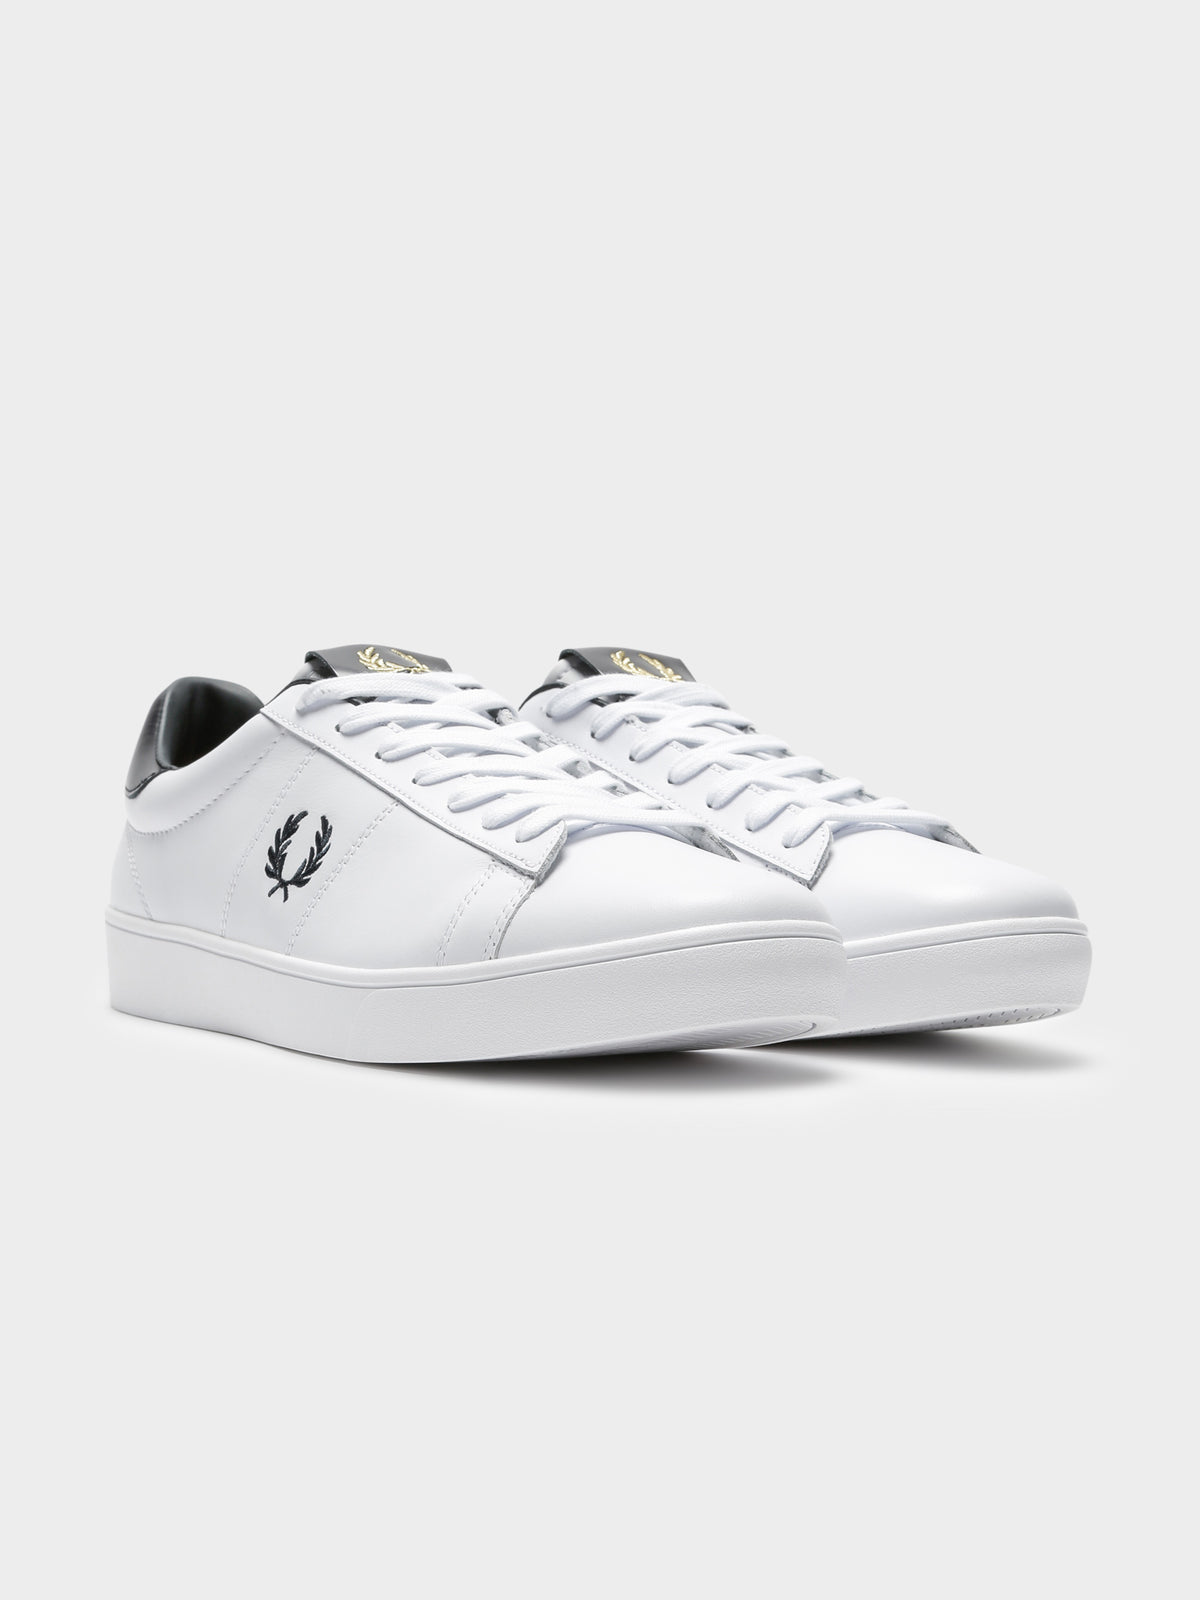 Mens Spencer Suede Sneakers in White and Navy